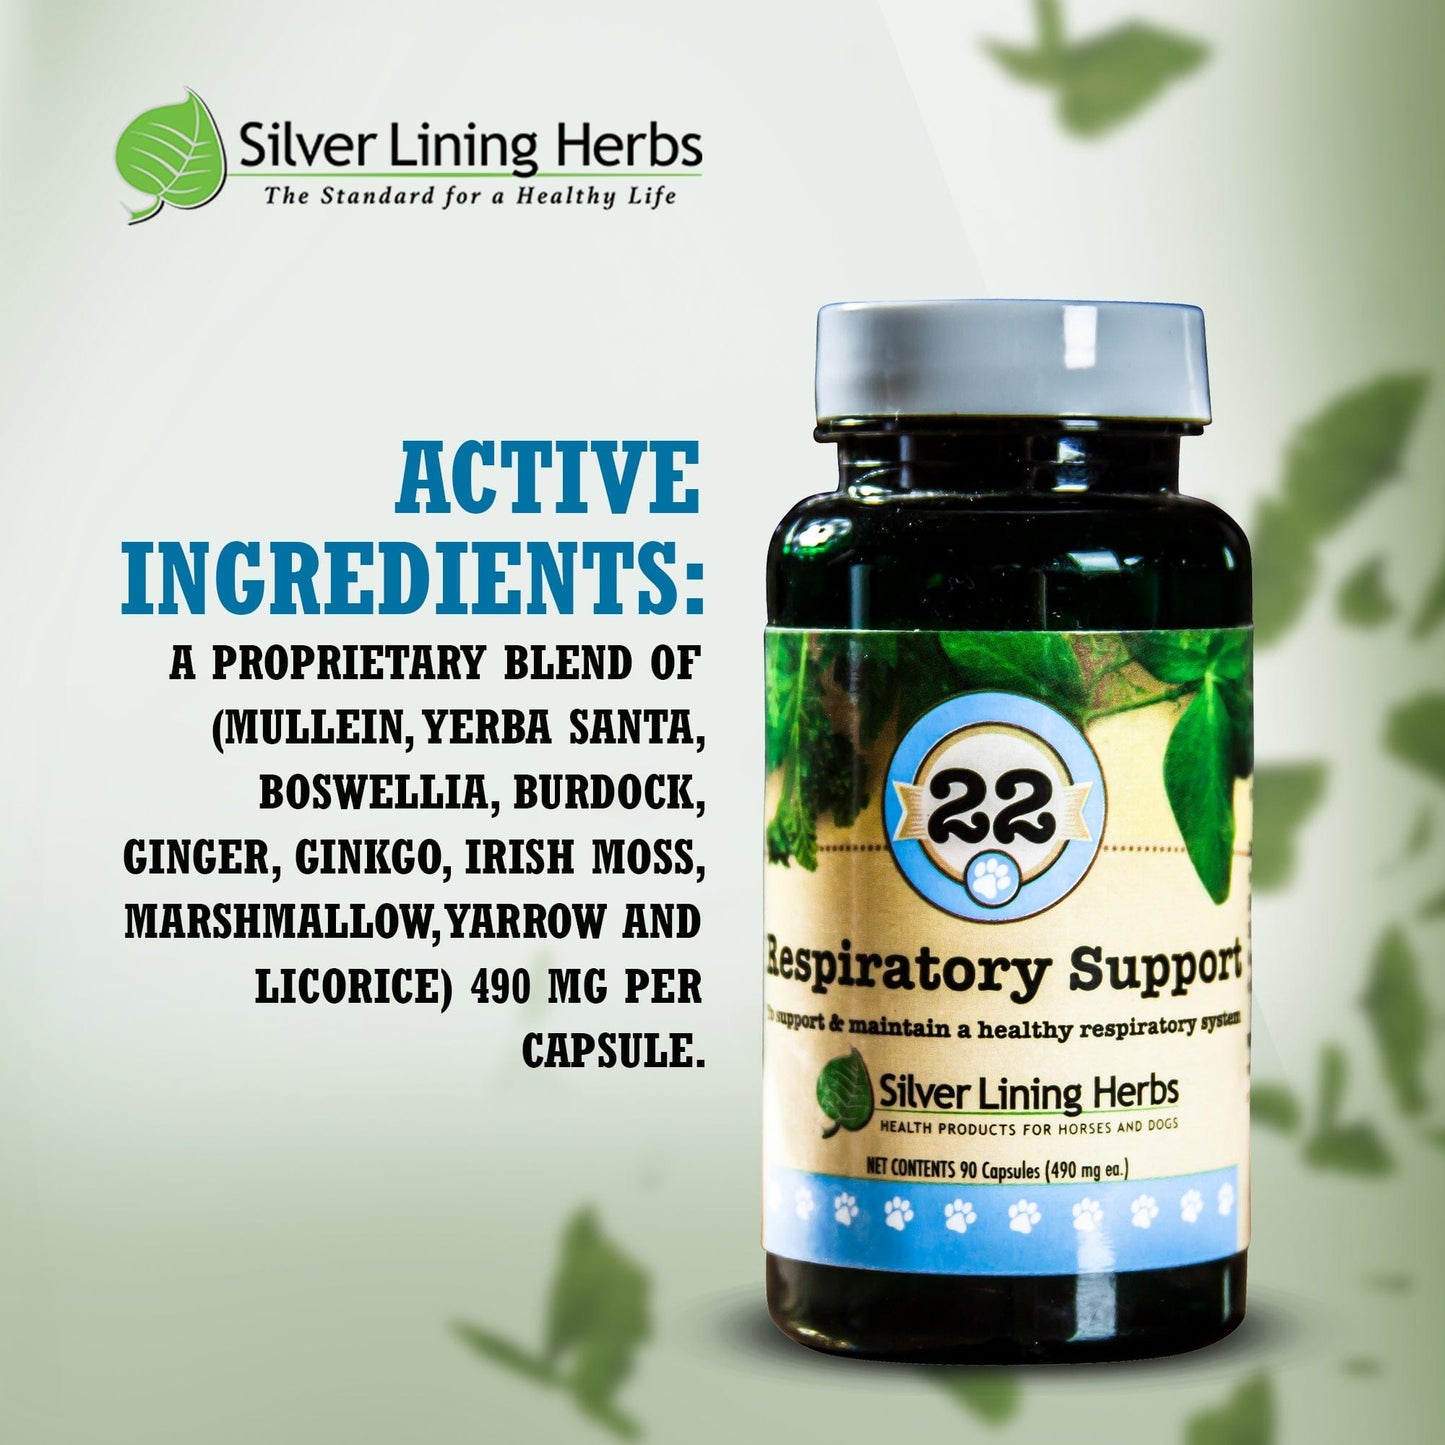 22 Respiratory Support for Dogs - Silver Lining Herbs